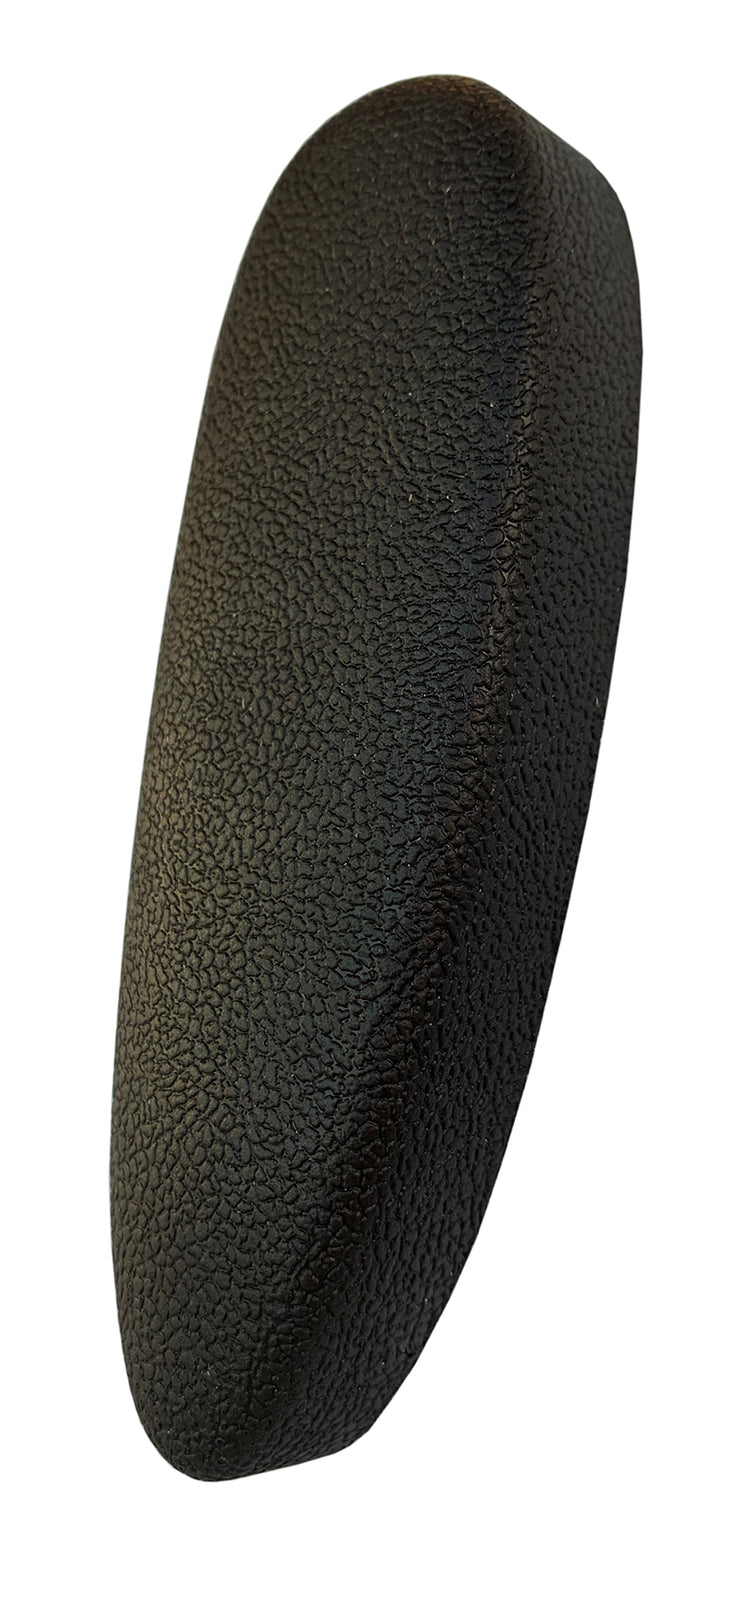 Cervellati Cervellati Microcell Leather Effect Recoil Pad 23Mm Thick - Black 80Mm Hole Space #214441-B Dark Slate Gray